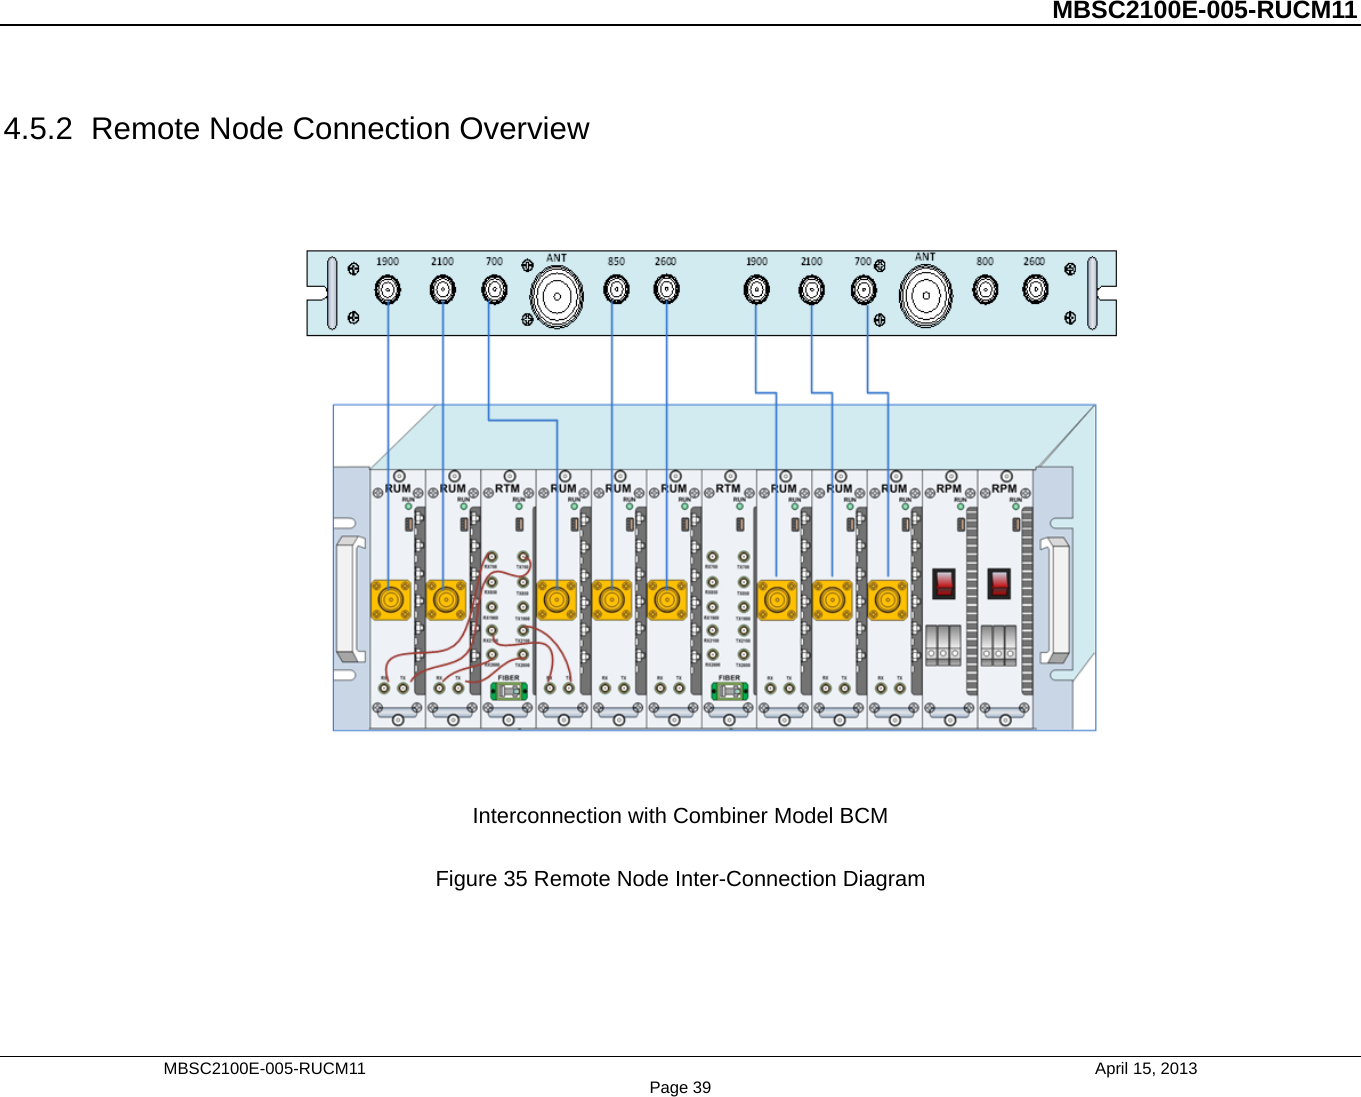          MBSC2100E-005-RUCM11   4.5.2 Remote Node Connection Overview   Interconnection with Combiner Model BCM  Figure 35 Remote Node Inter-Connection Diagram  MBSC2100E-005-RUCM11                                April 15, 2013 Page 39 